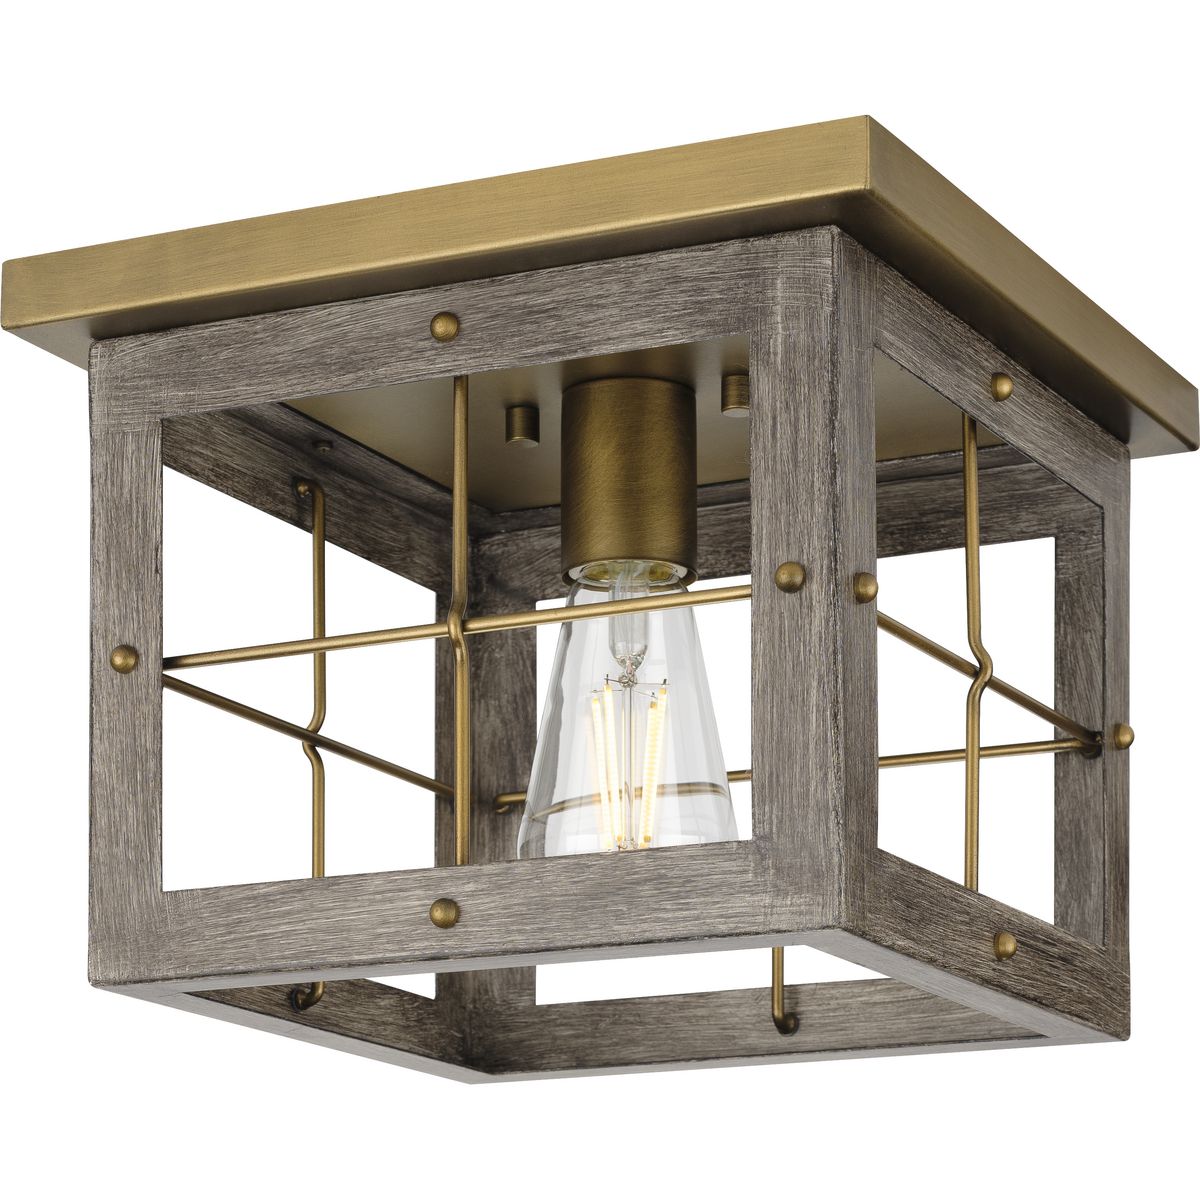 PROGRESS LIGHTING P350197-175 Distressed Brass Hedgerow Collection One-Light Distressed Brass and Aged Oak Farmhouse Style Flush Mount Ceiling Light